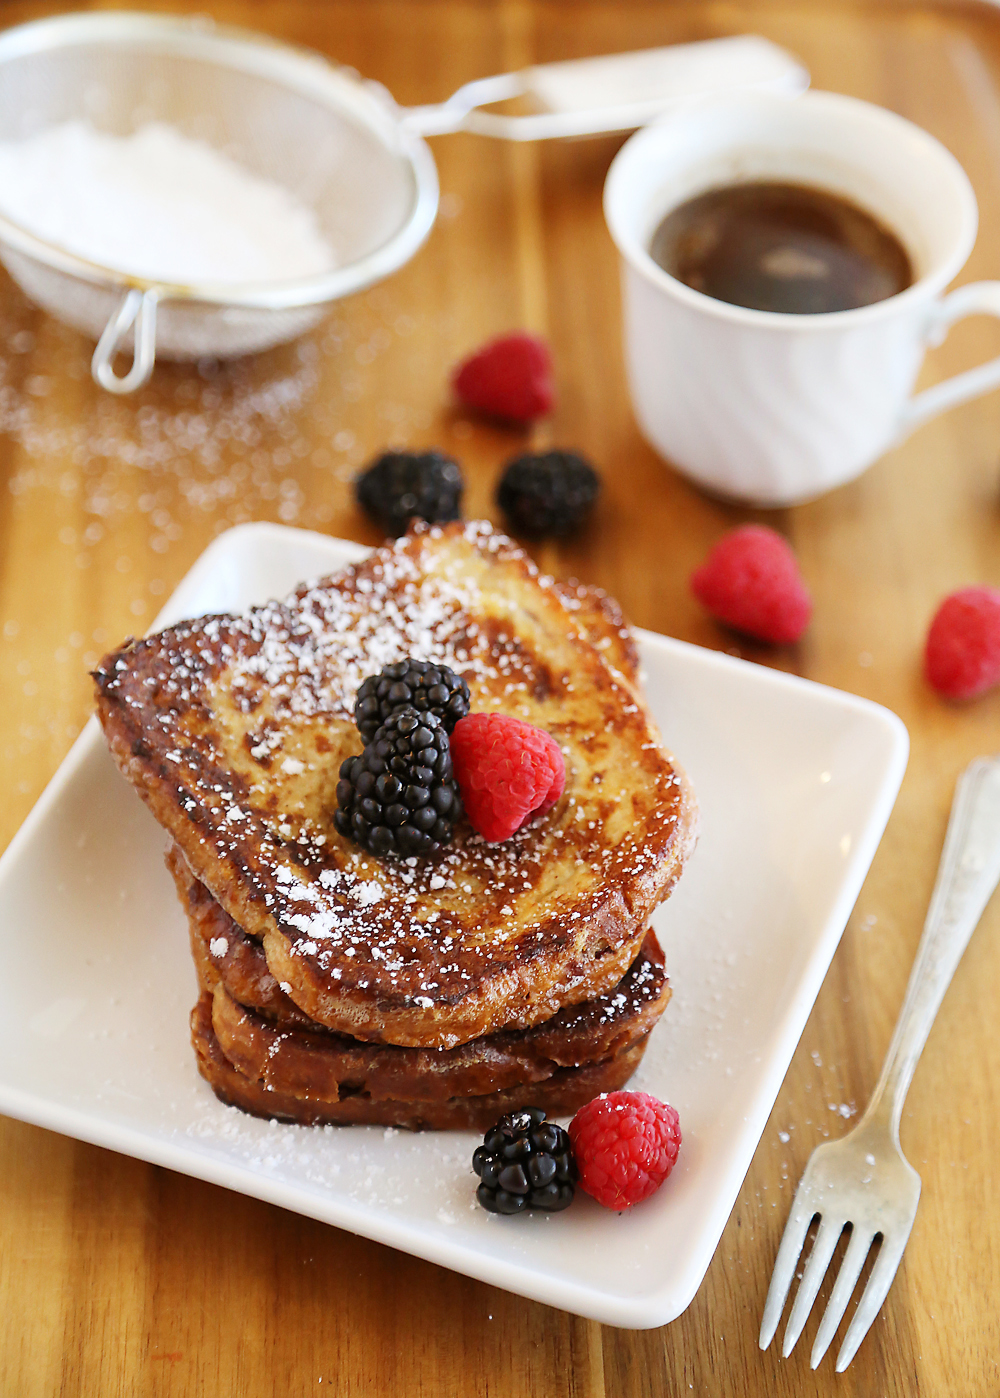 Cinnamon Swirl Bread French Toast – Just 5 ingredients and 10 minutes for this easy, gooey and delicious morning treat. Top with berries! Thecomfortofcooking.com